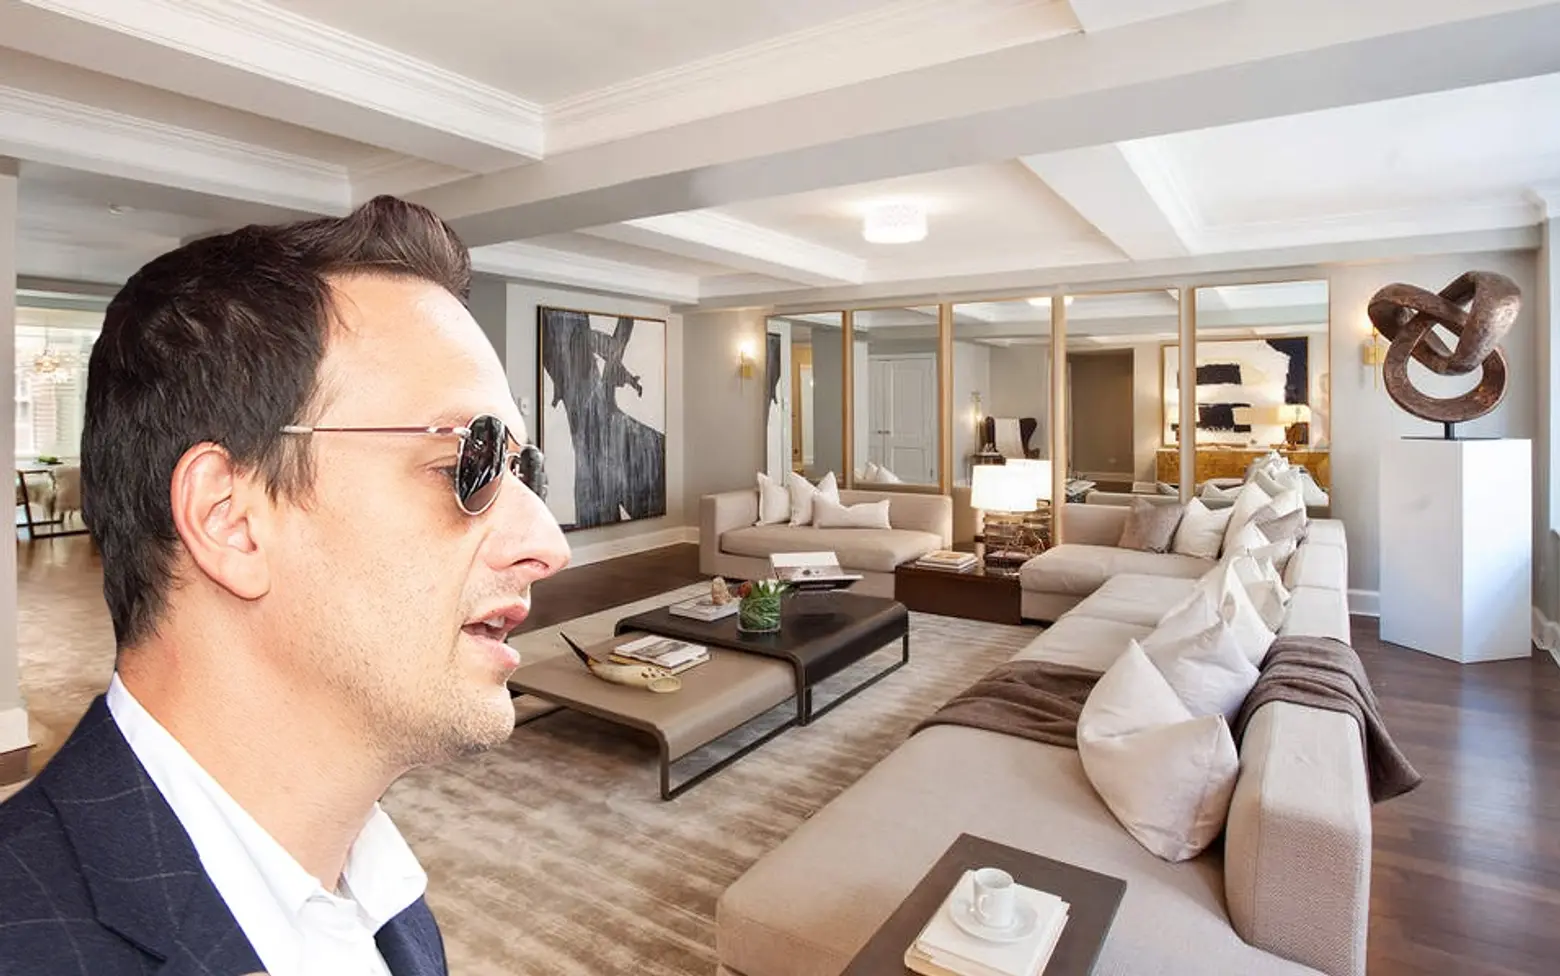 ‘Good Wife’ star Josh Charles buys Devonshire House pad in the Village for $6.3M